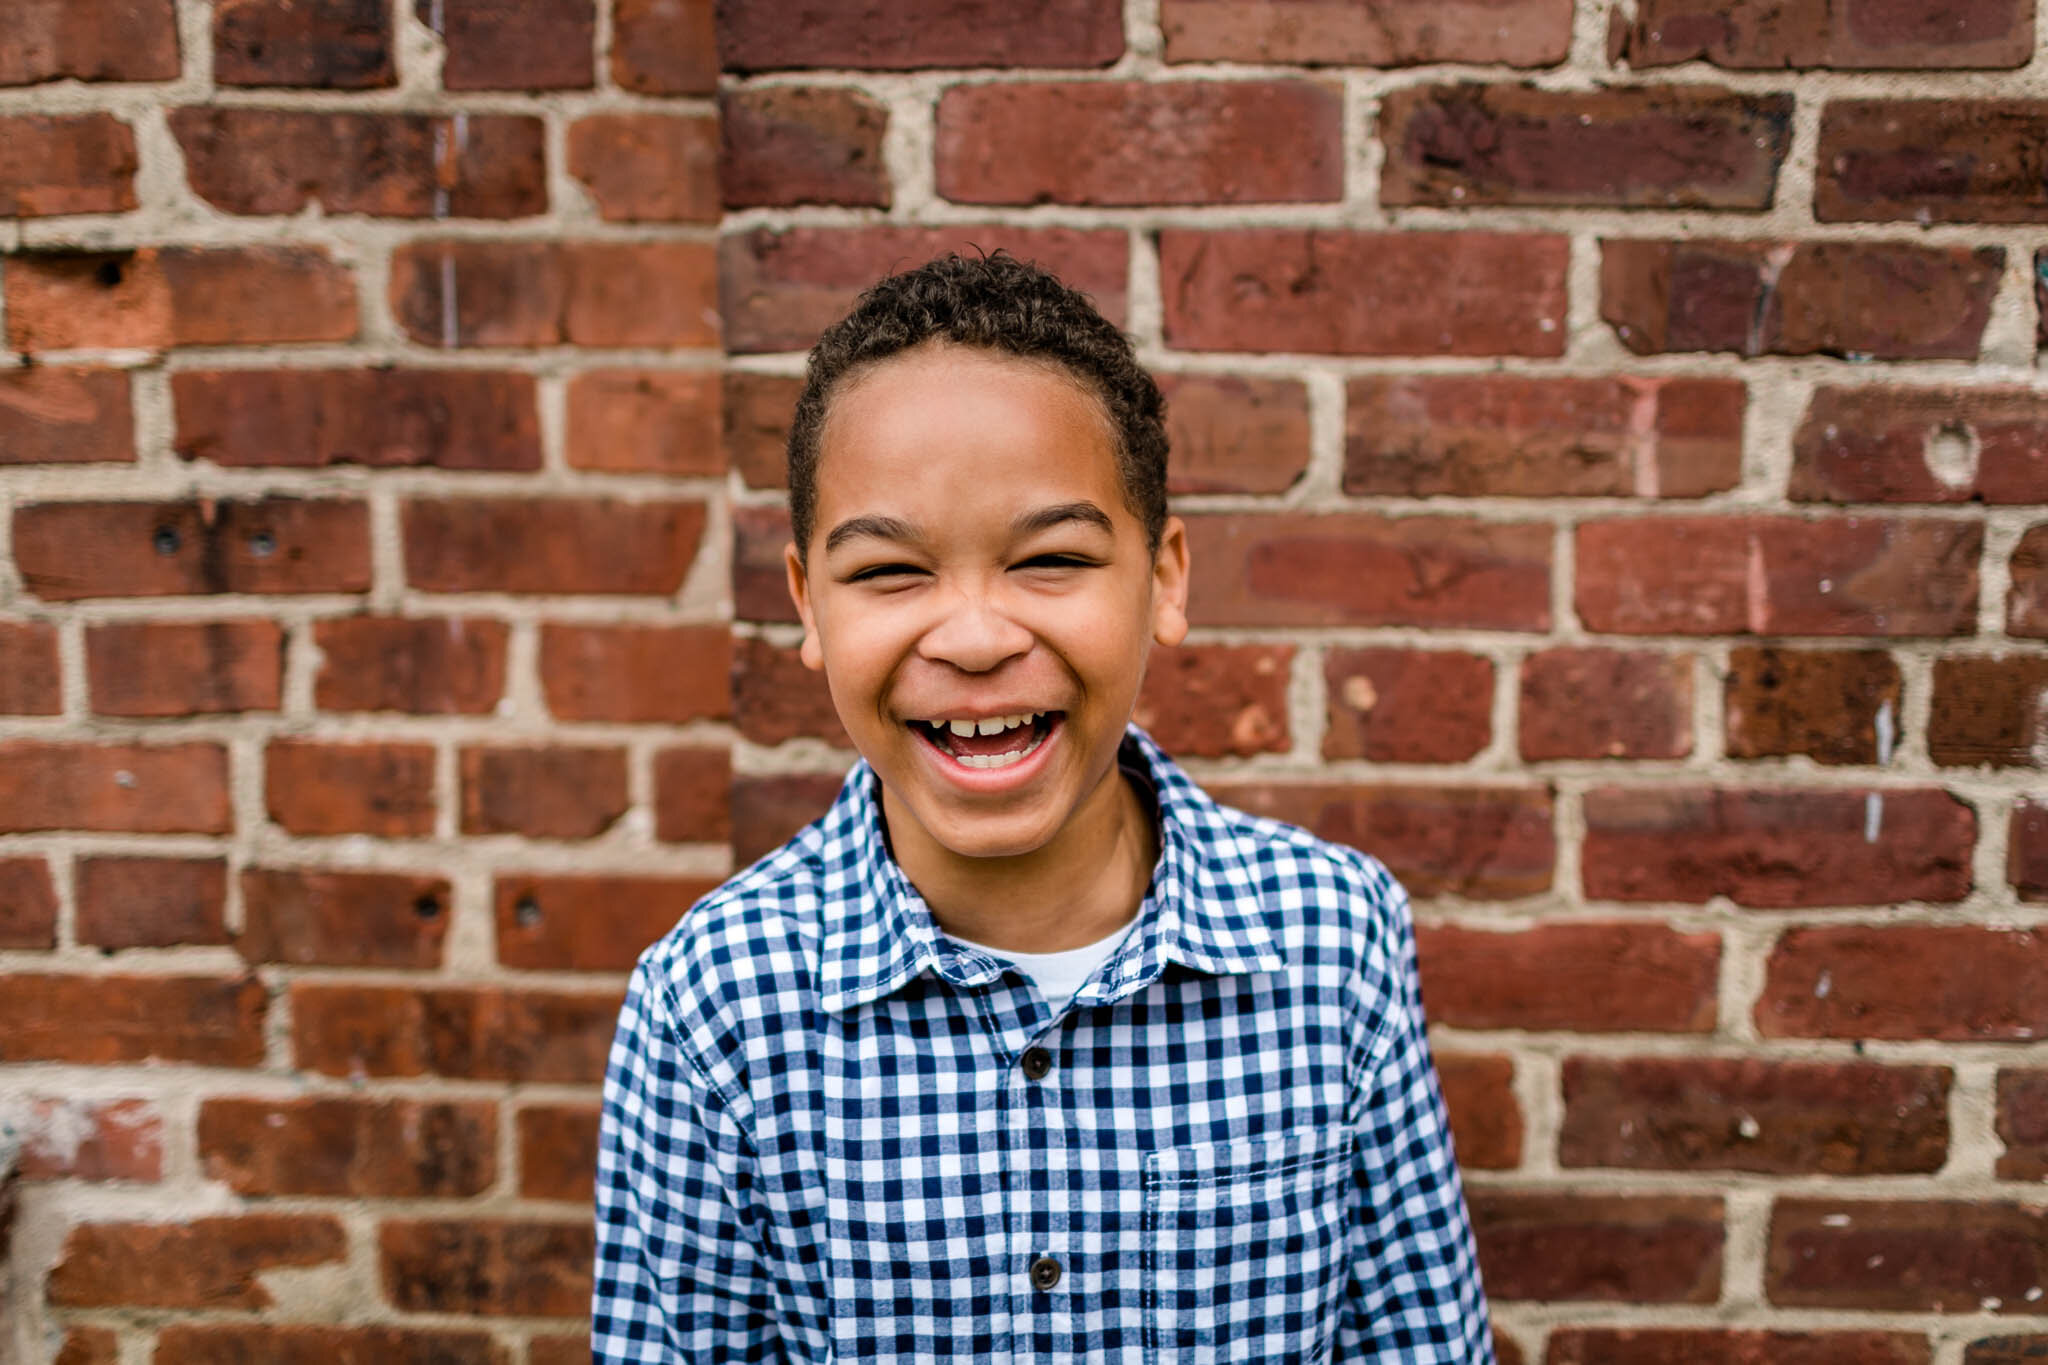 Candid portrait of young boy laughing | Durham Family Photographer | By G. Lin Photography